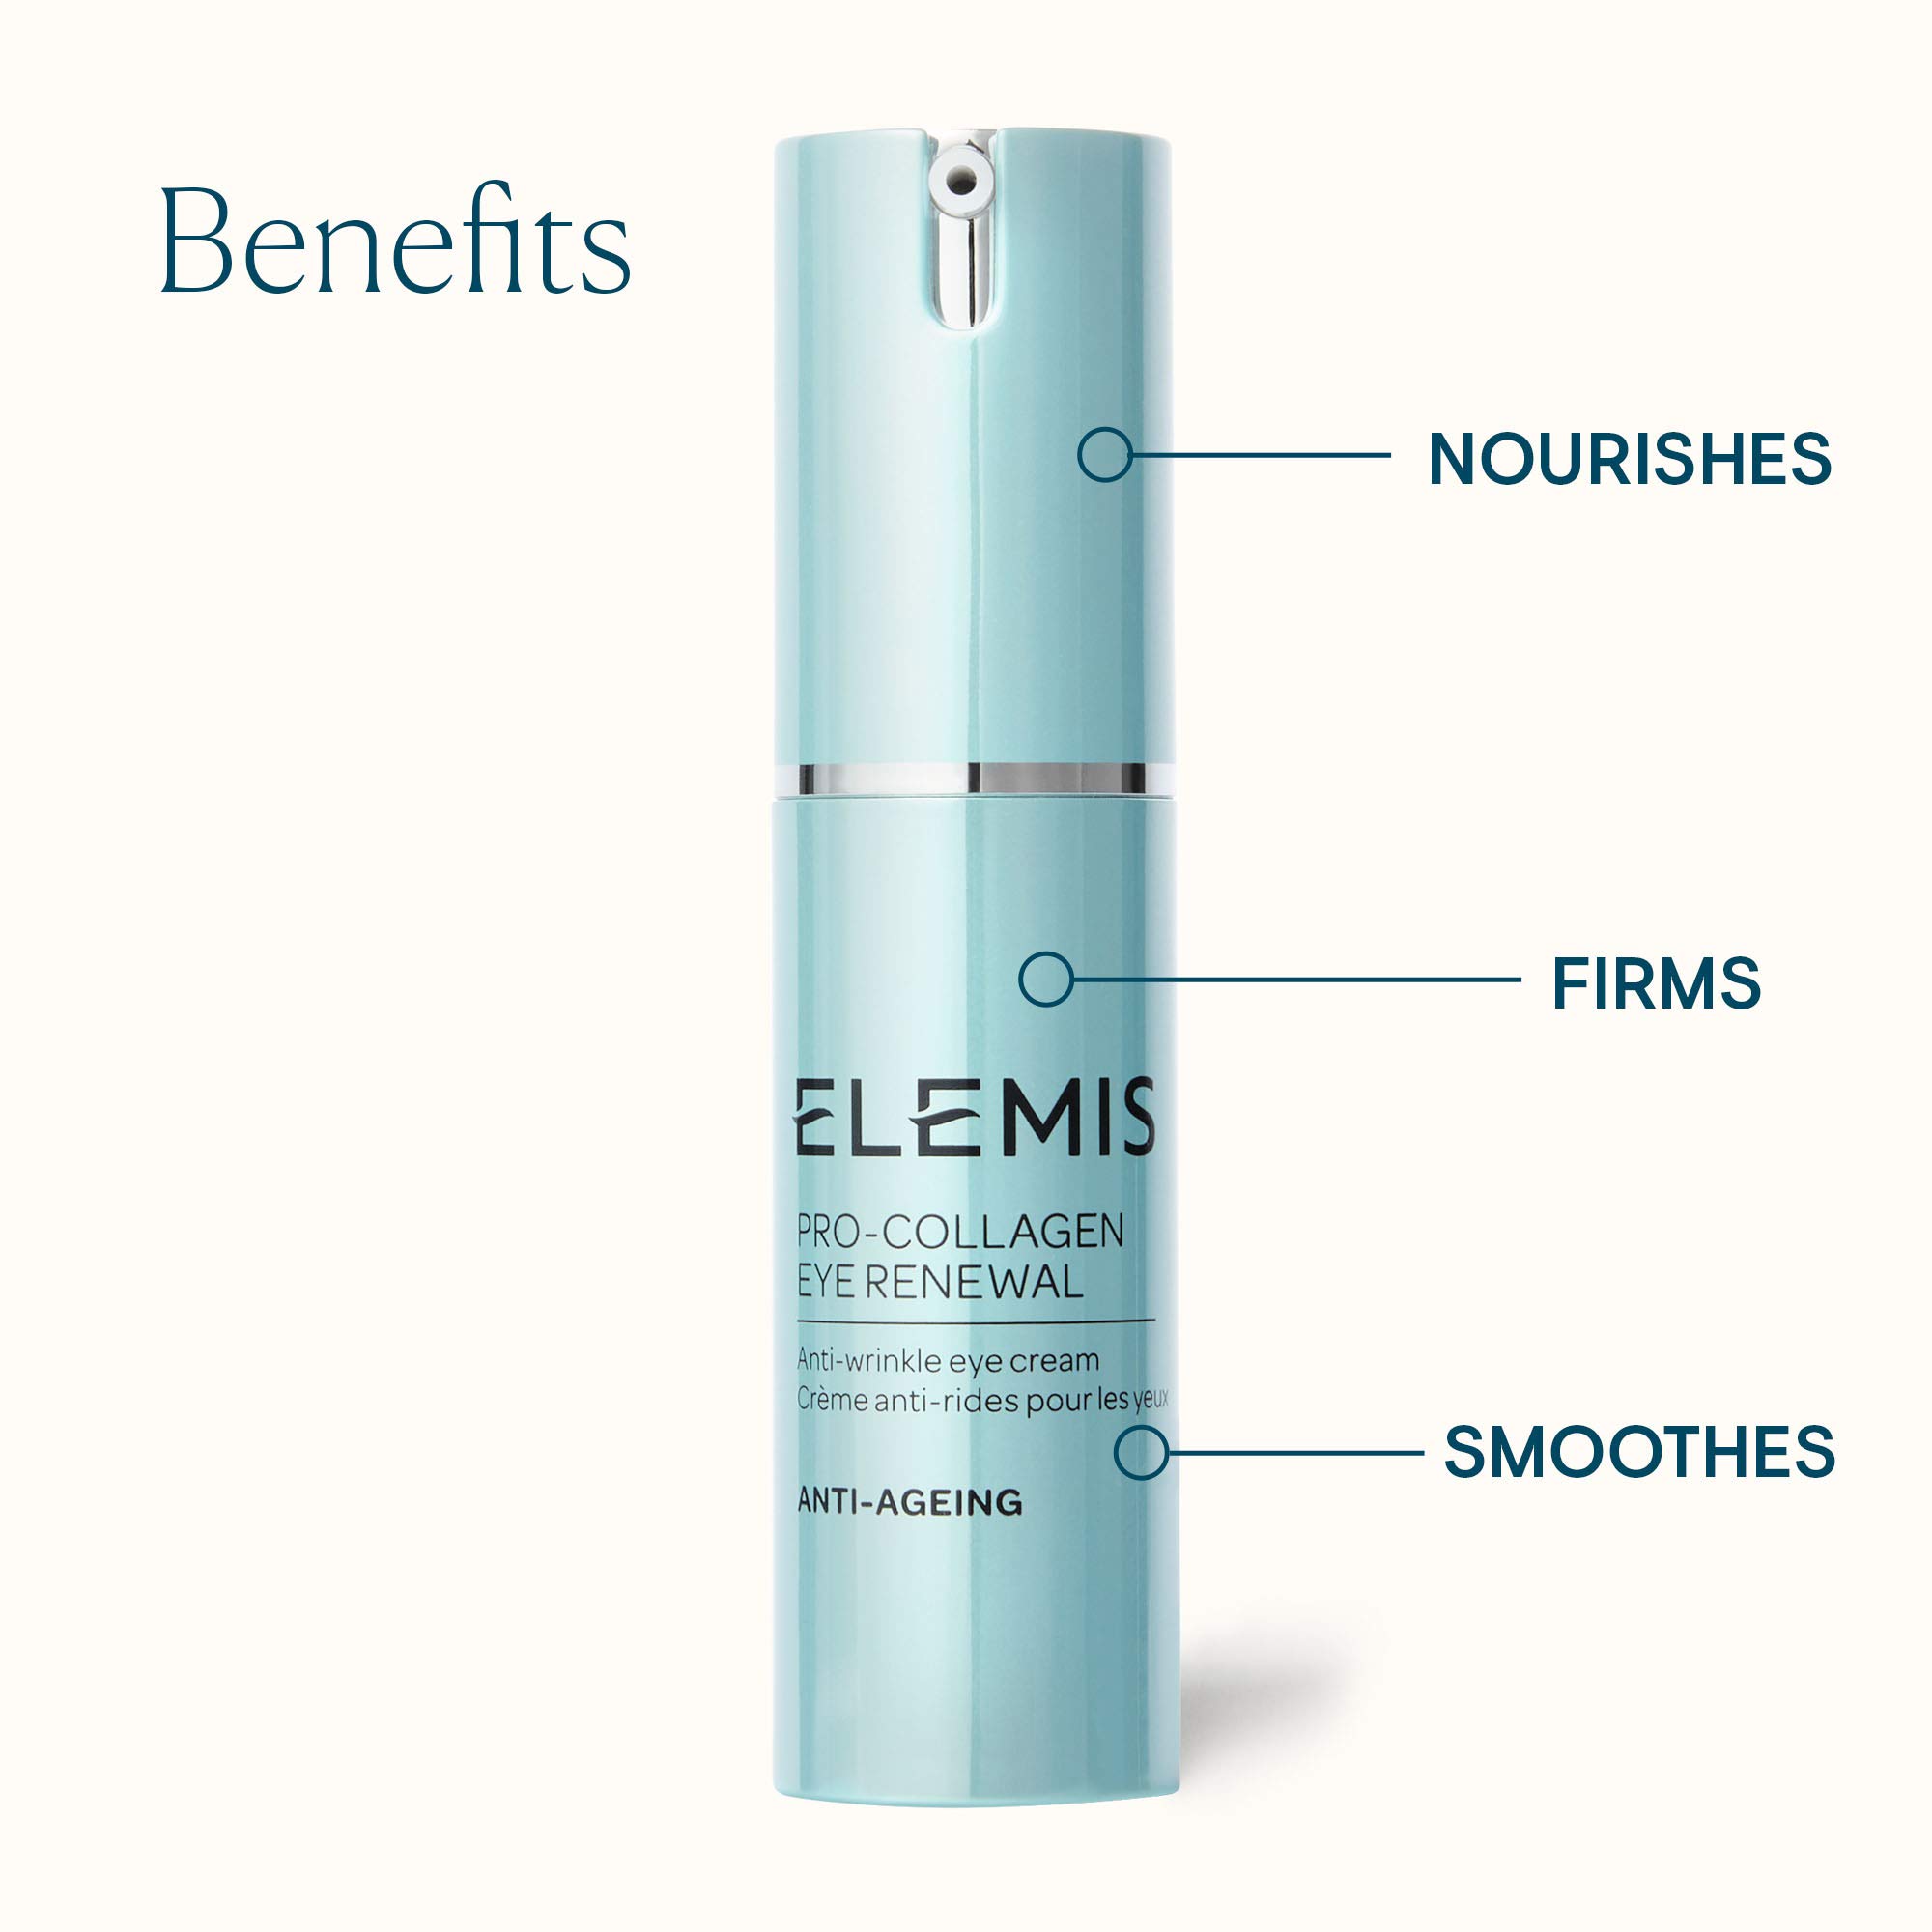 ELEMIS Pro-Collagen Eye Renewal | Nutrient-Rich Intensive Daily Anti-Wrinkle Eye Cream Deeply Nourishes, Firms, and Smoothes Delicate Skin | 15 mL